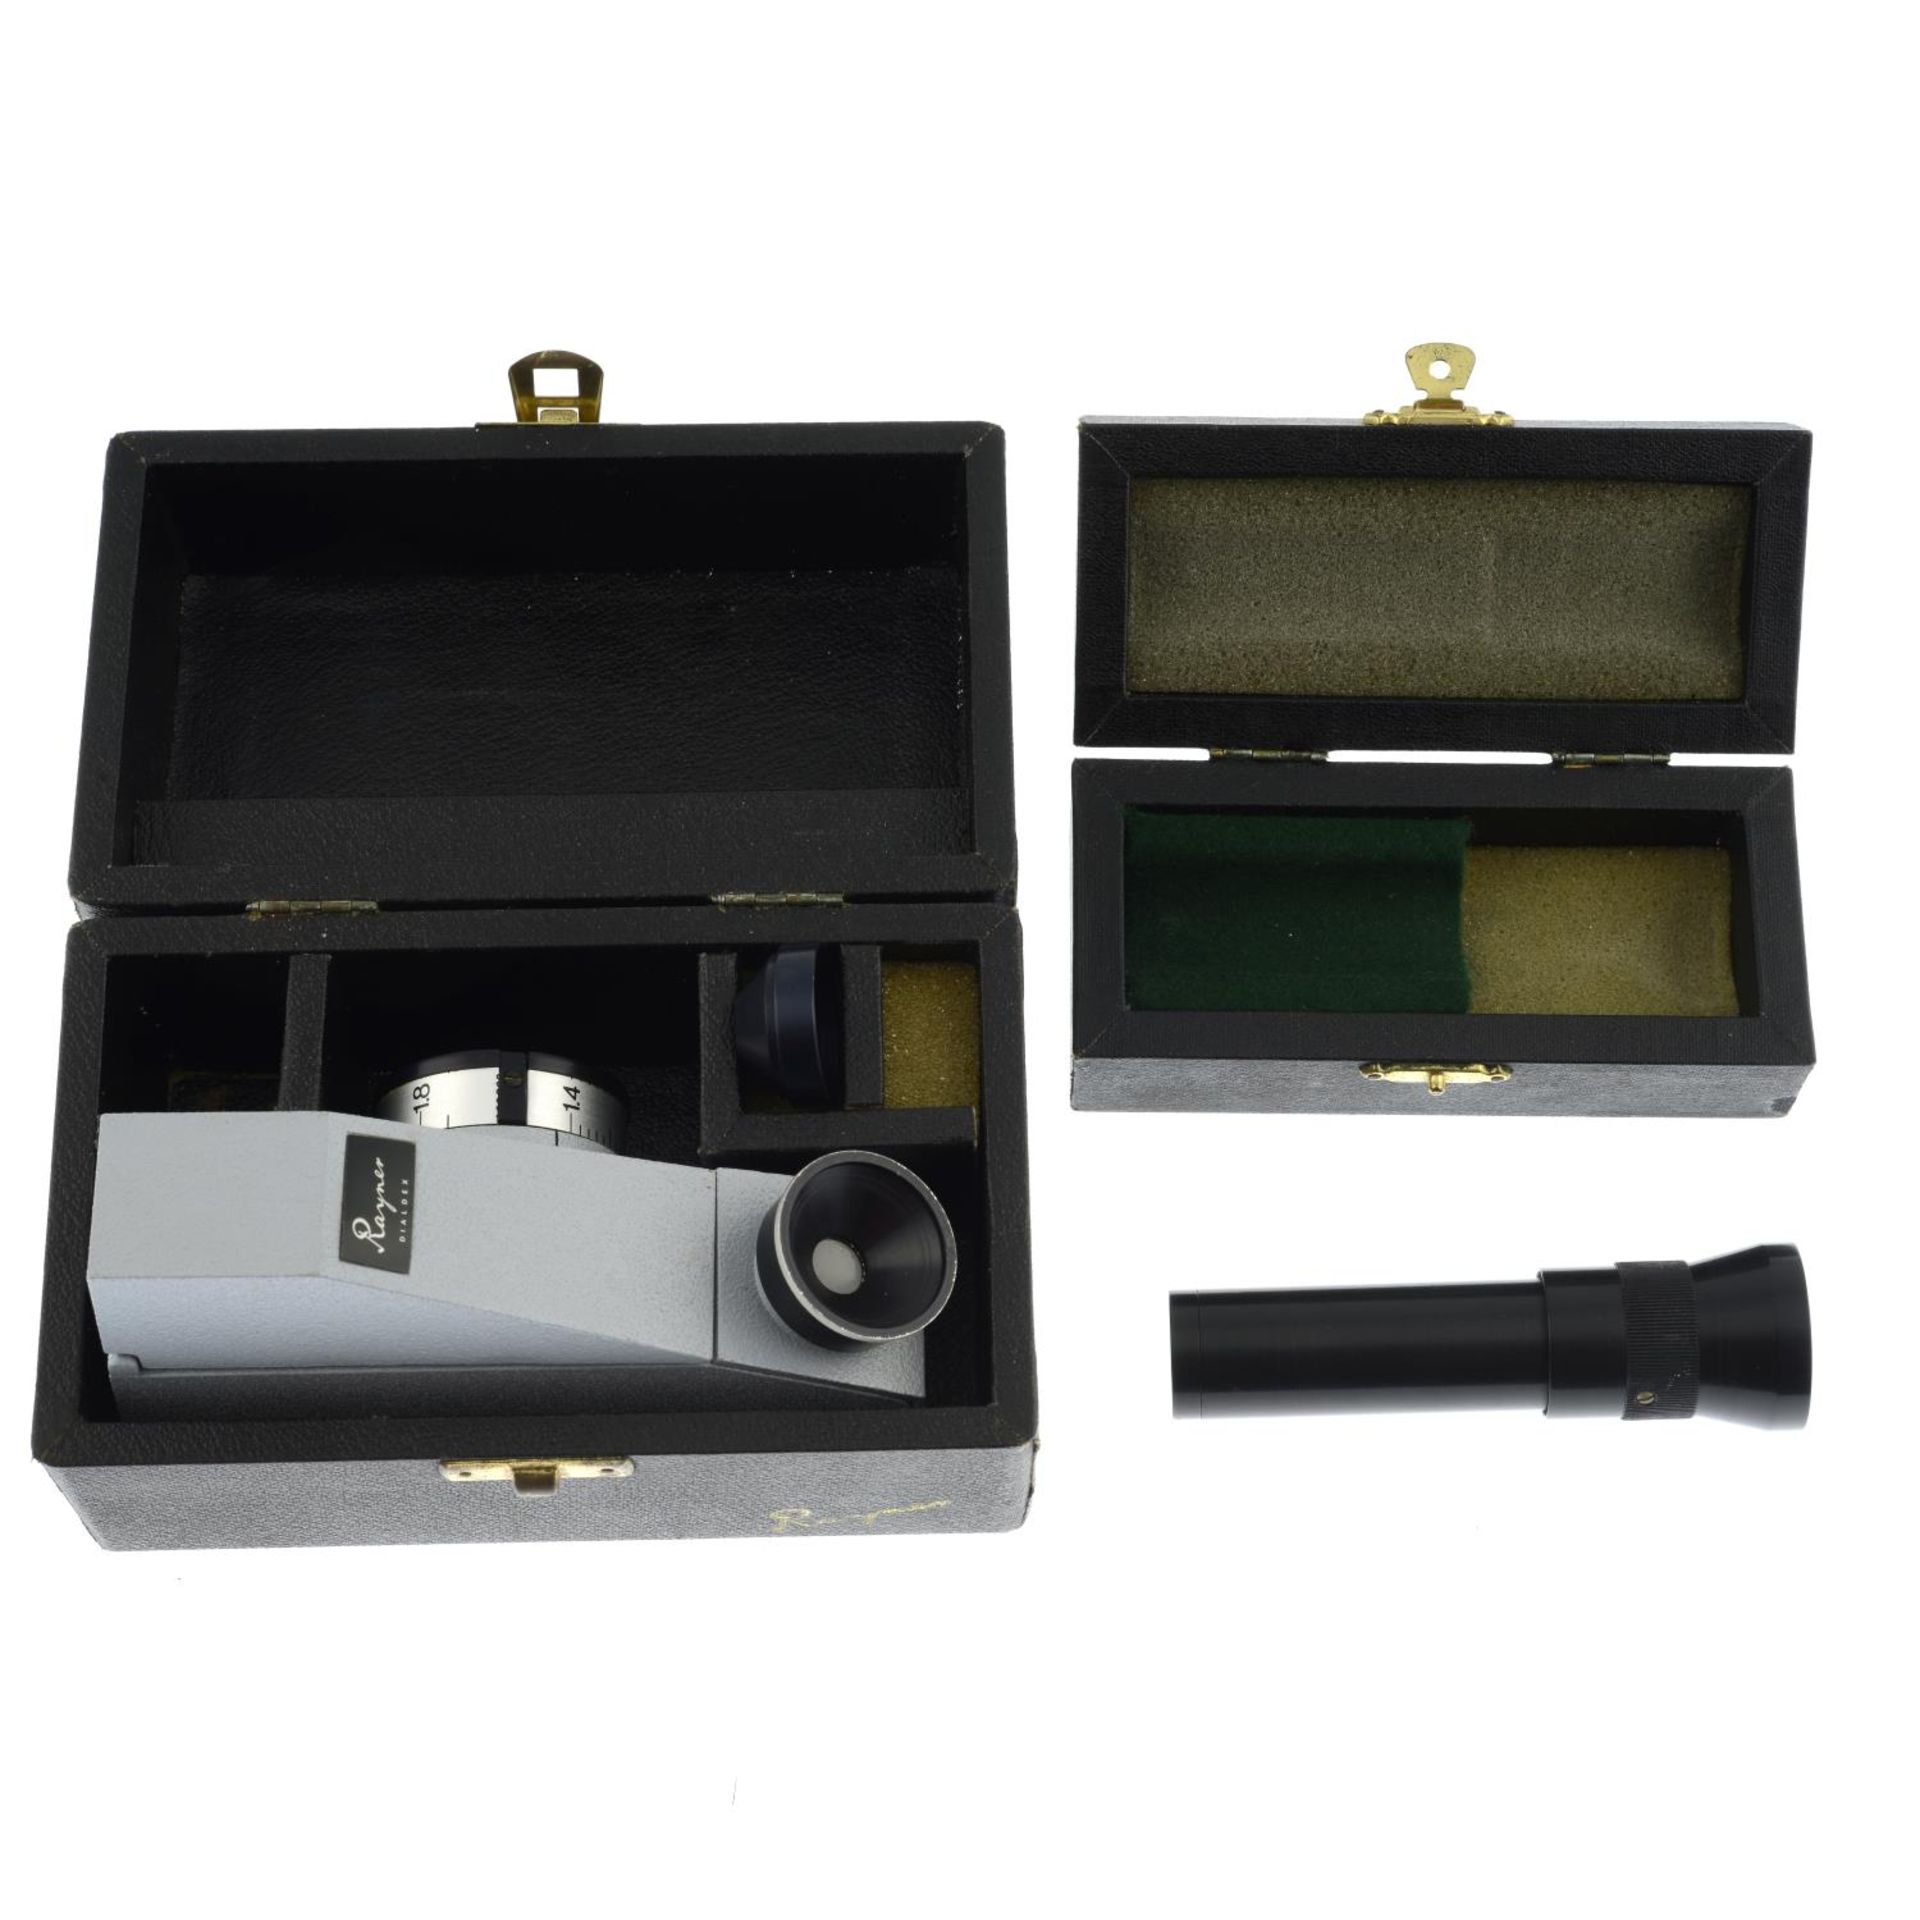 A Rayner refractometer and spectroscope, with stand. - Image 4 of 7